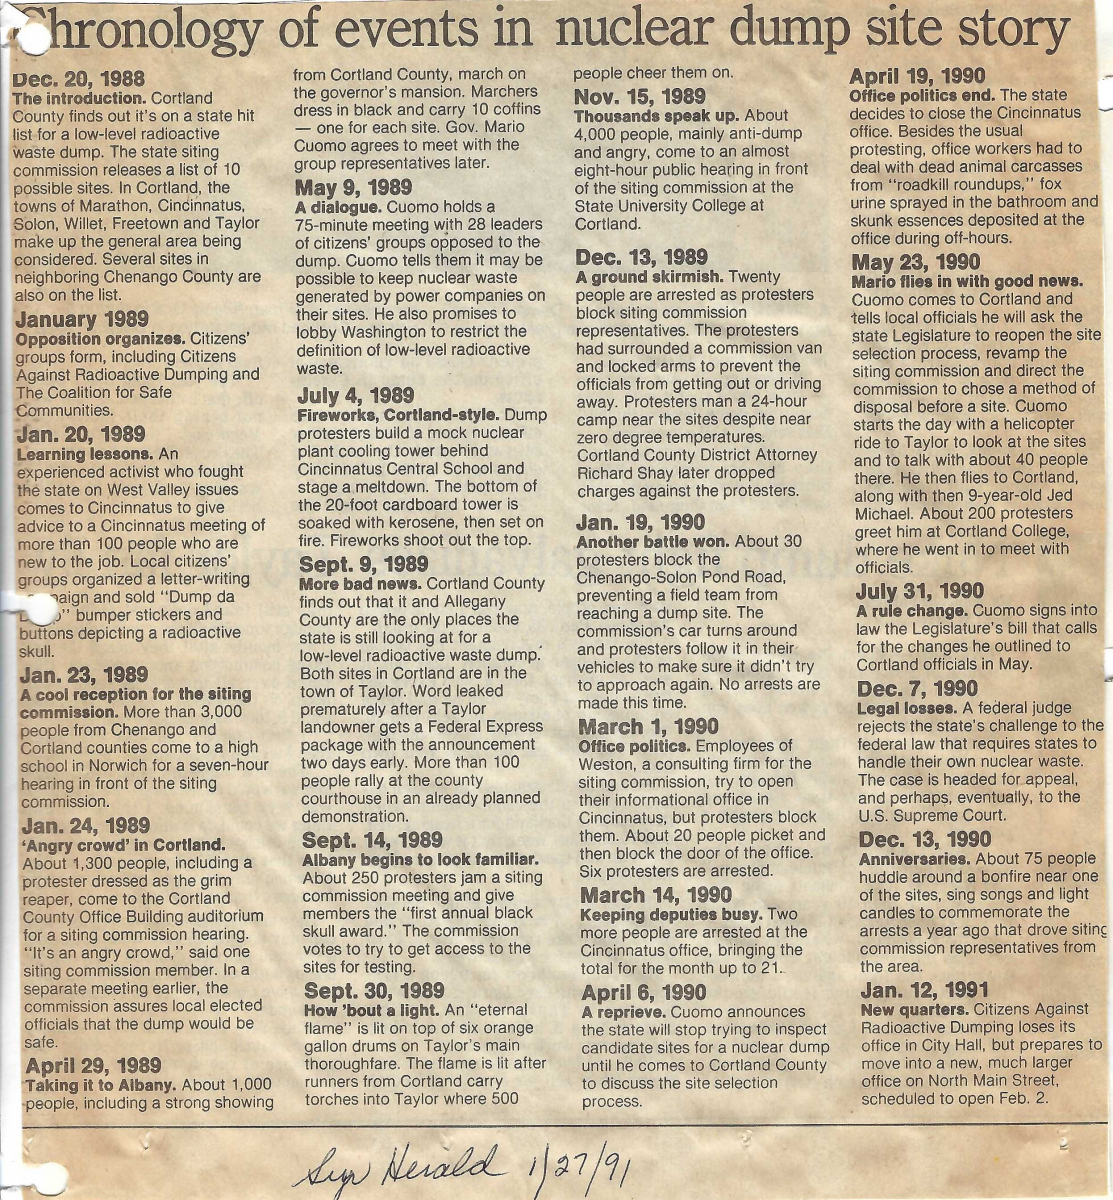 Chronology of events from December 1988-January 1991